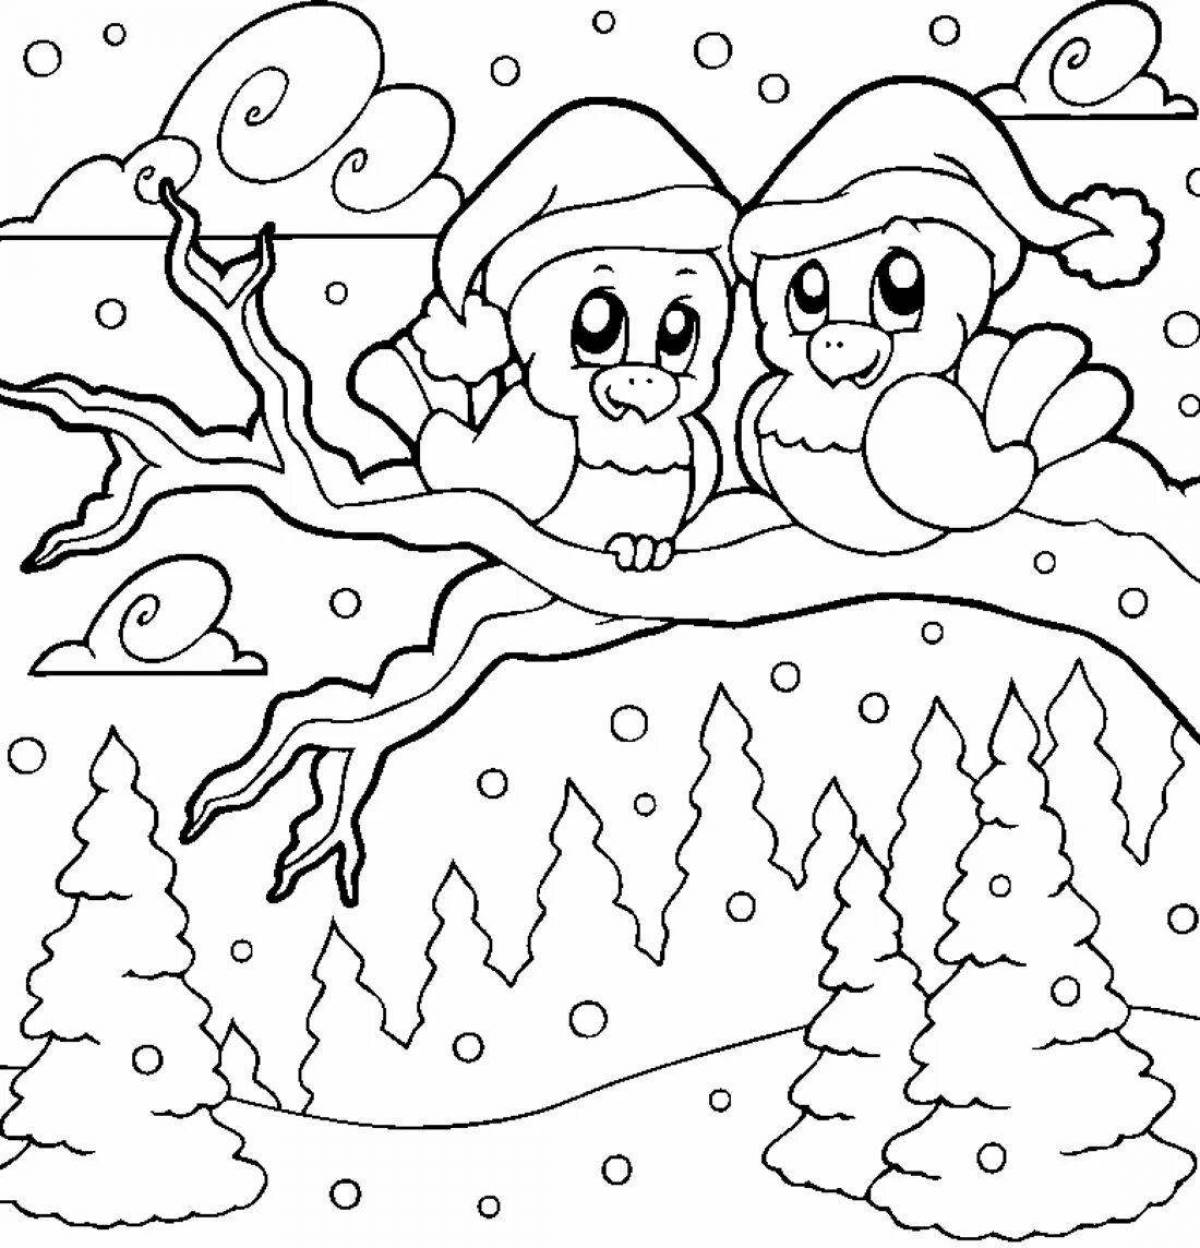 Winter forest drawing #4